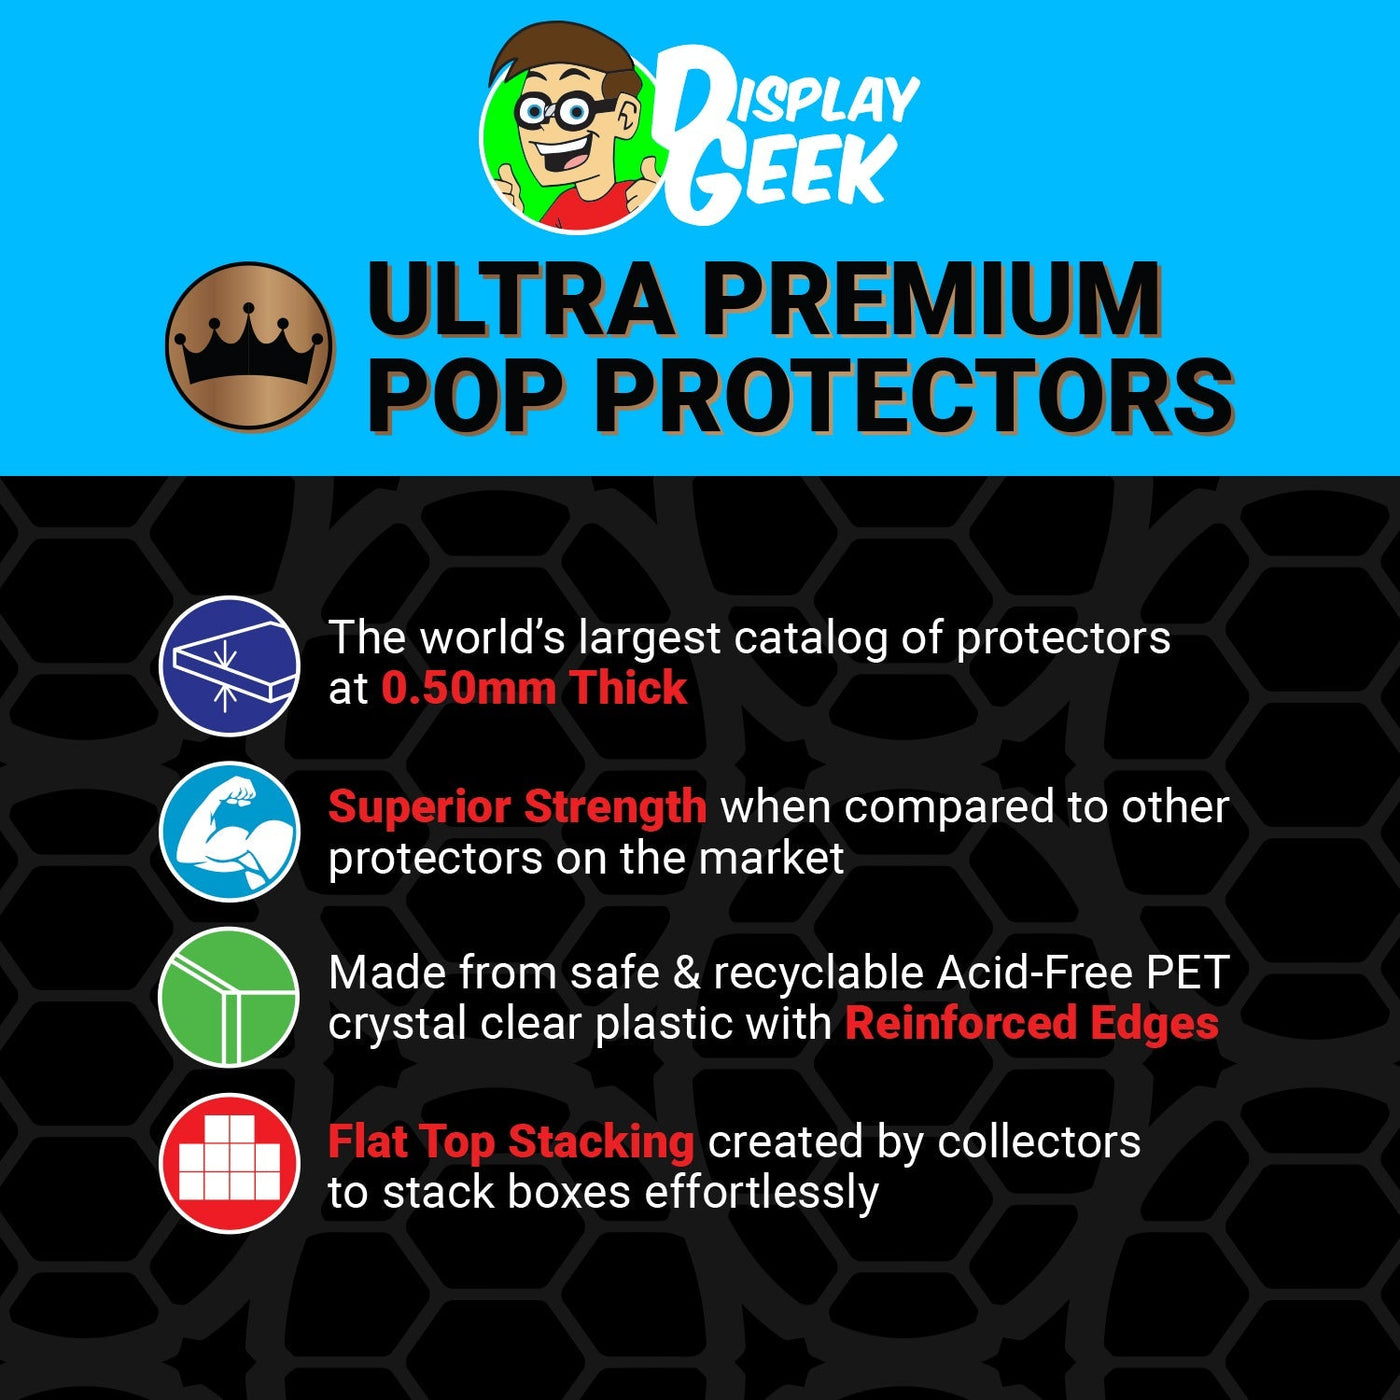 Pop Protector for 9 inch Giant Freddy Funko Black & White SDCC Funko Pop on The Protector Guide App by Display Geek